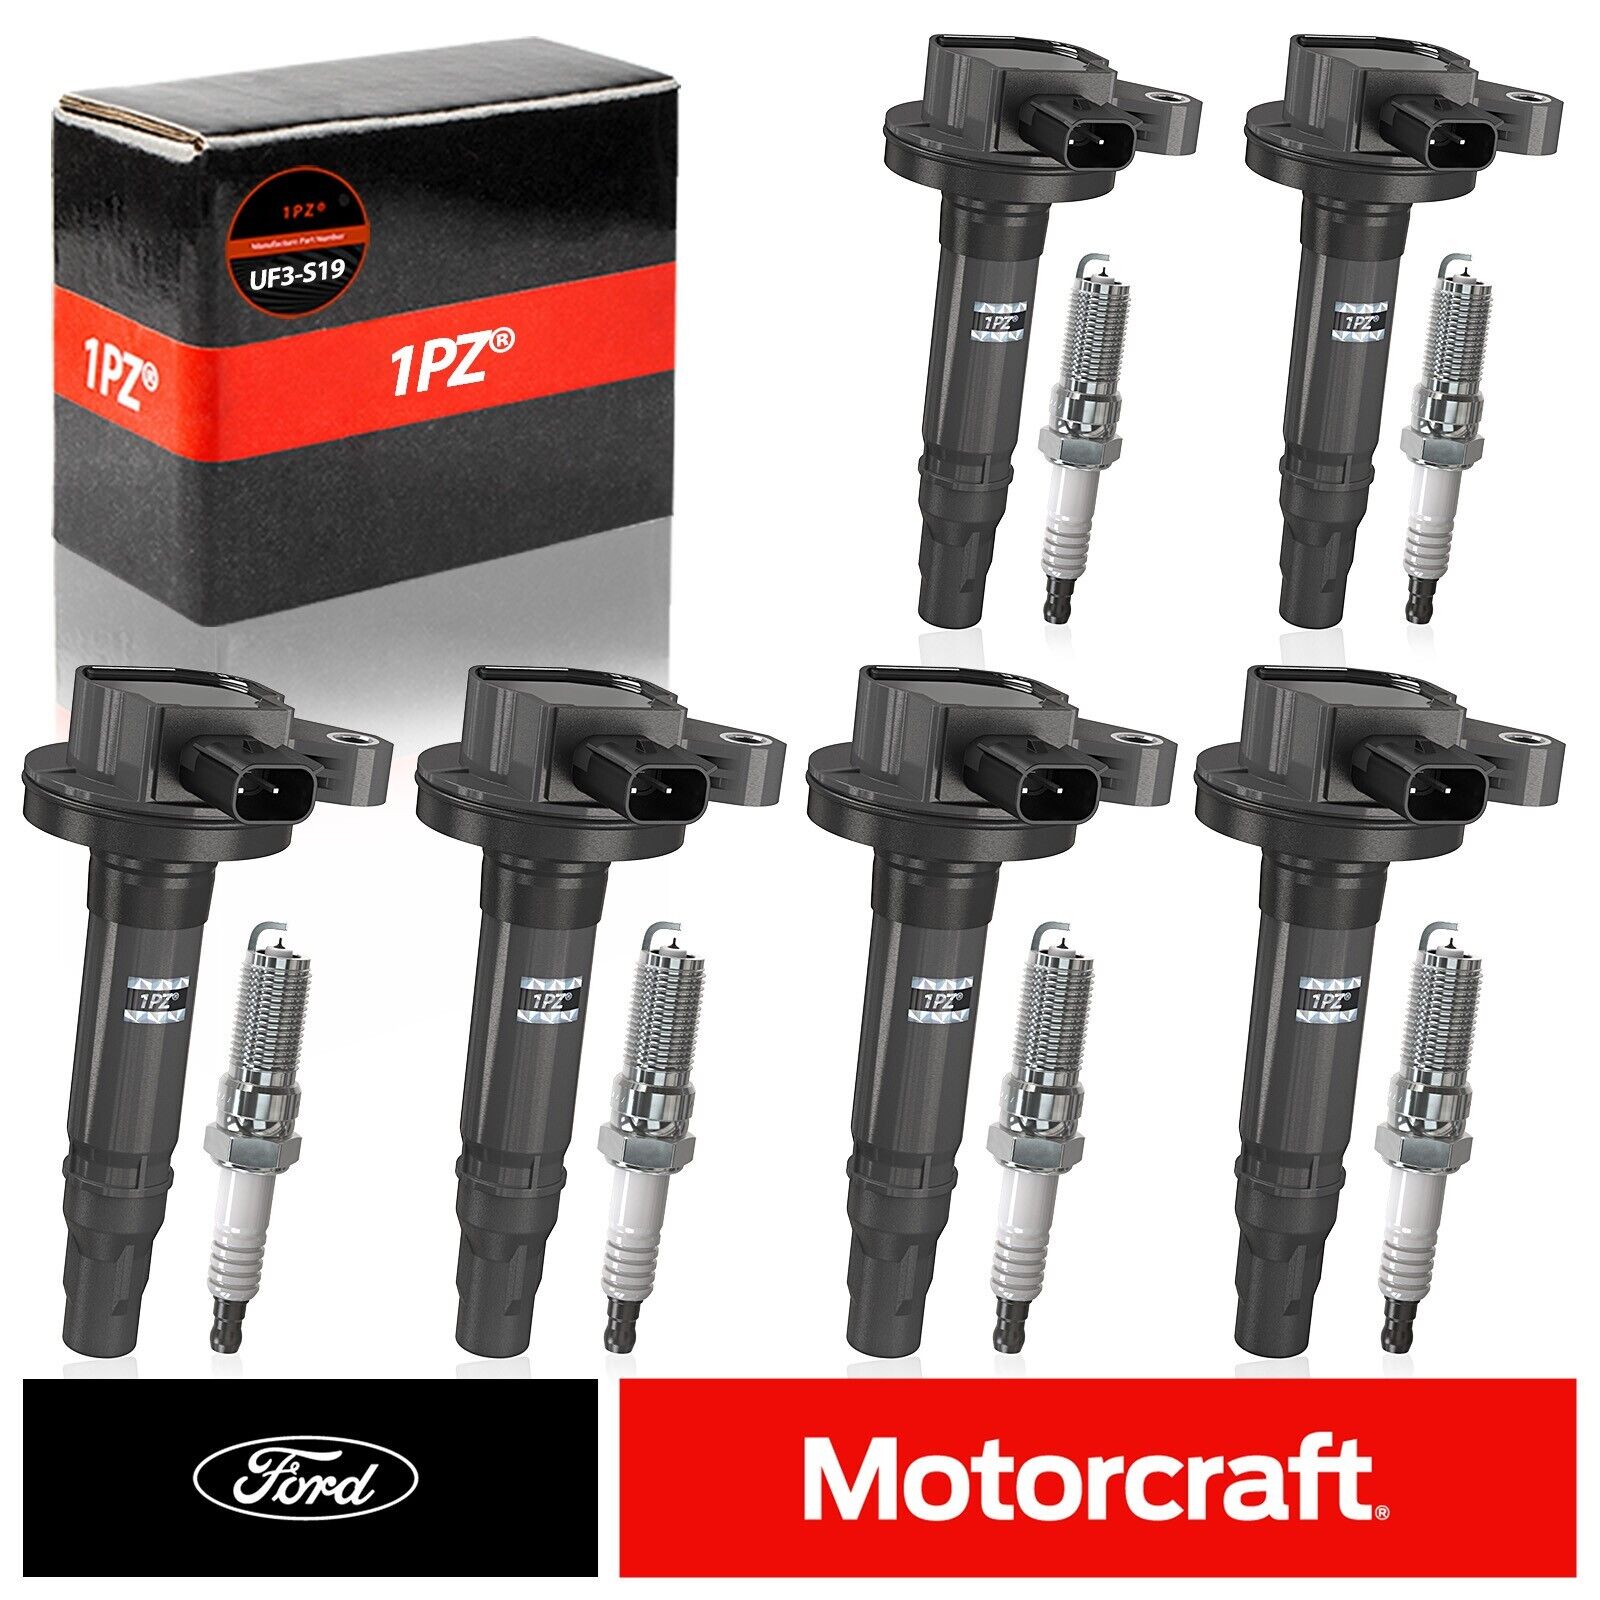 6 x OEM DG520 Motorcraft Ignition Coils For Ford 07-13 Lincoln Mercury 3.5L 3.7L